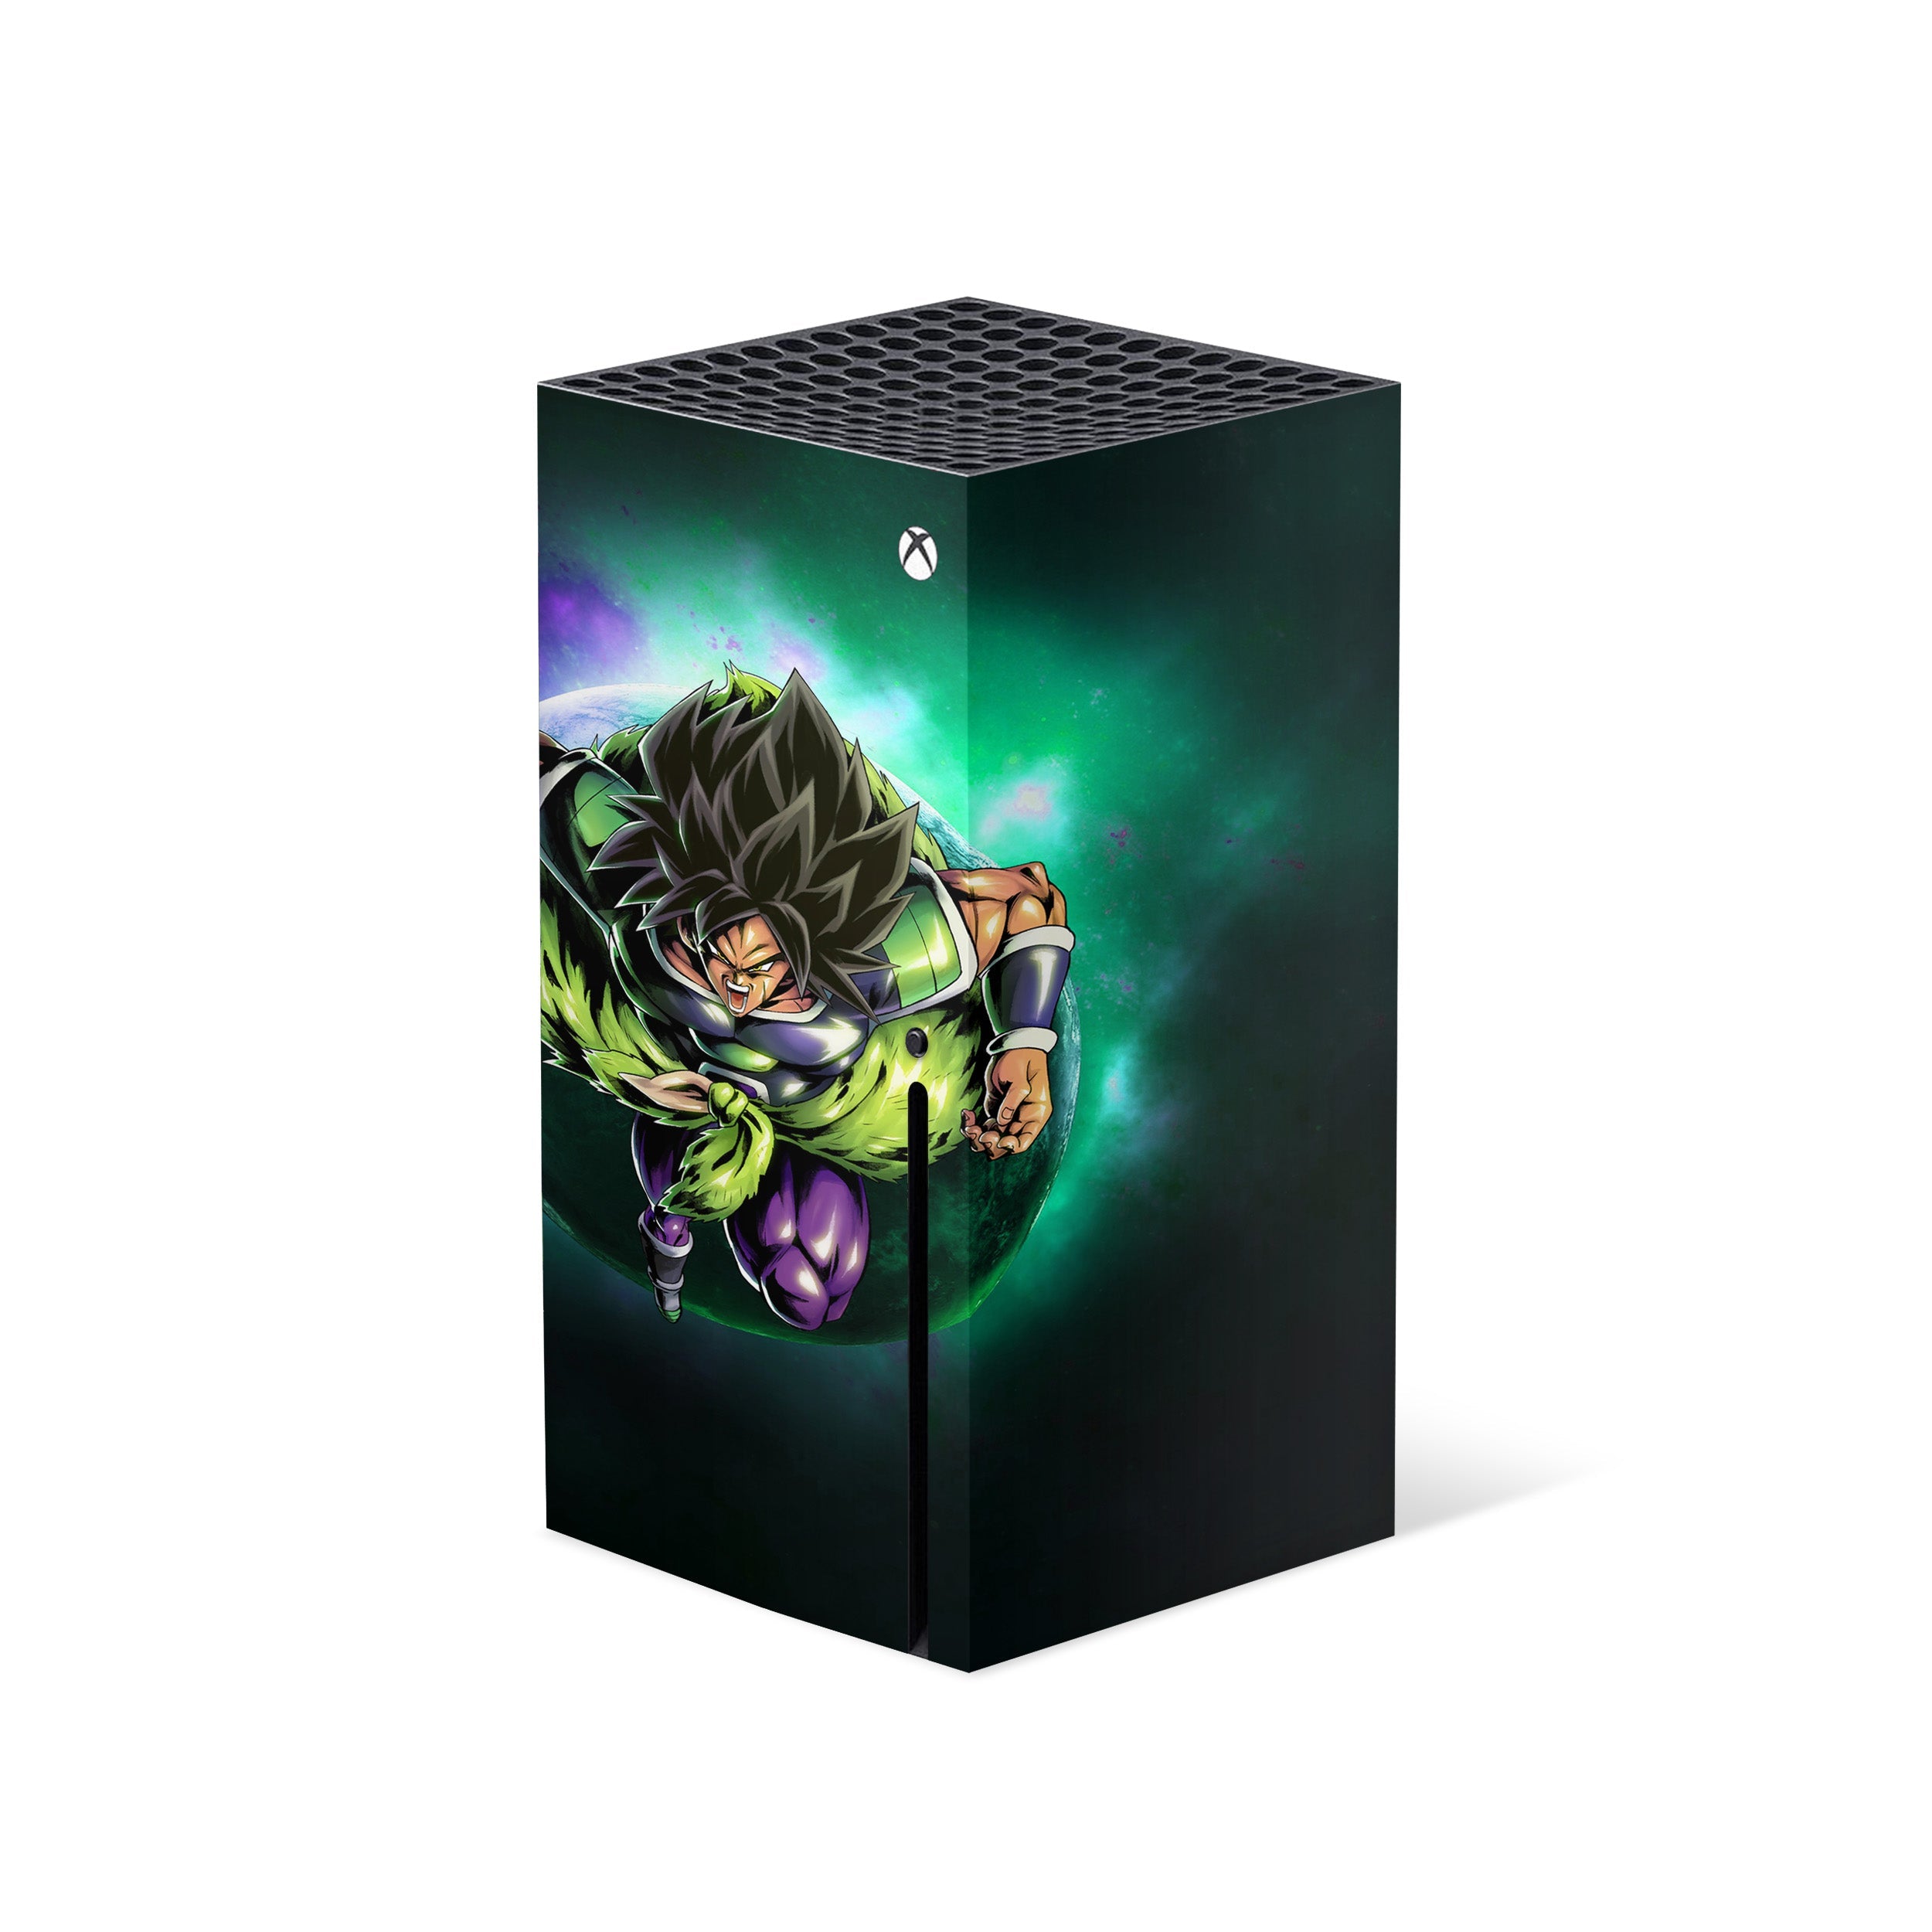 A video game skin featuring a Dragon Ball Super Broly design for the Xbox Series X.